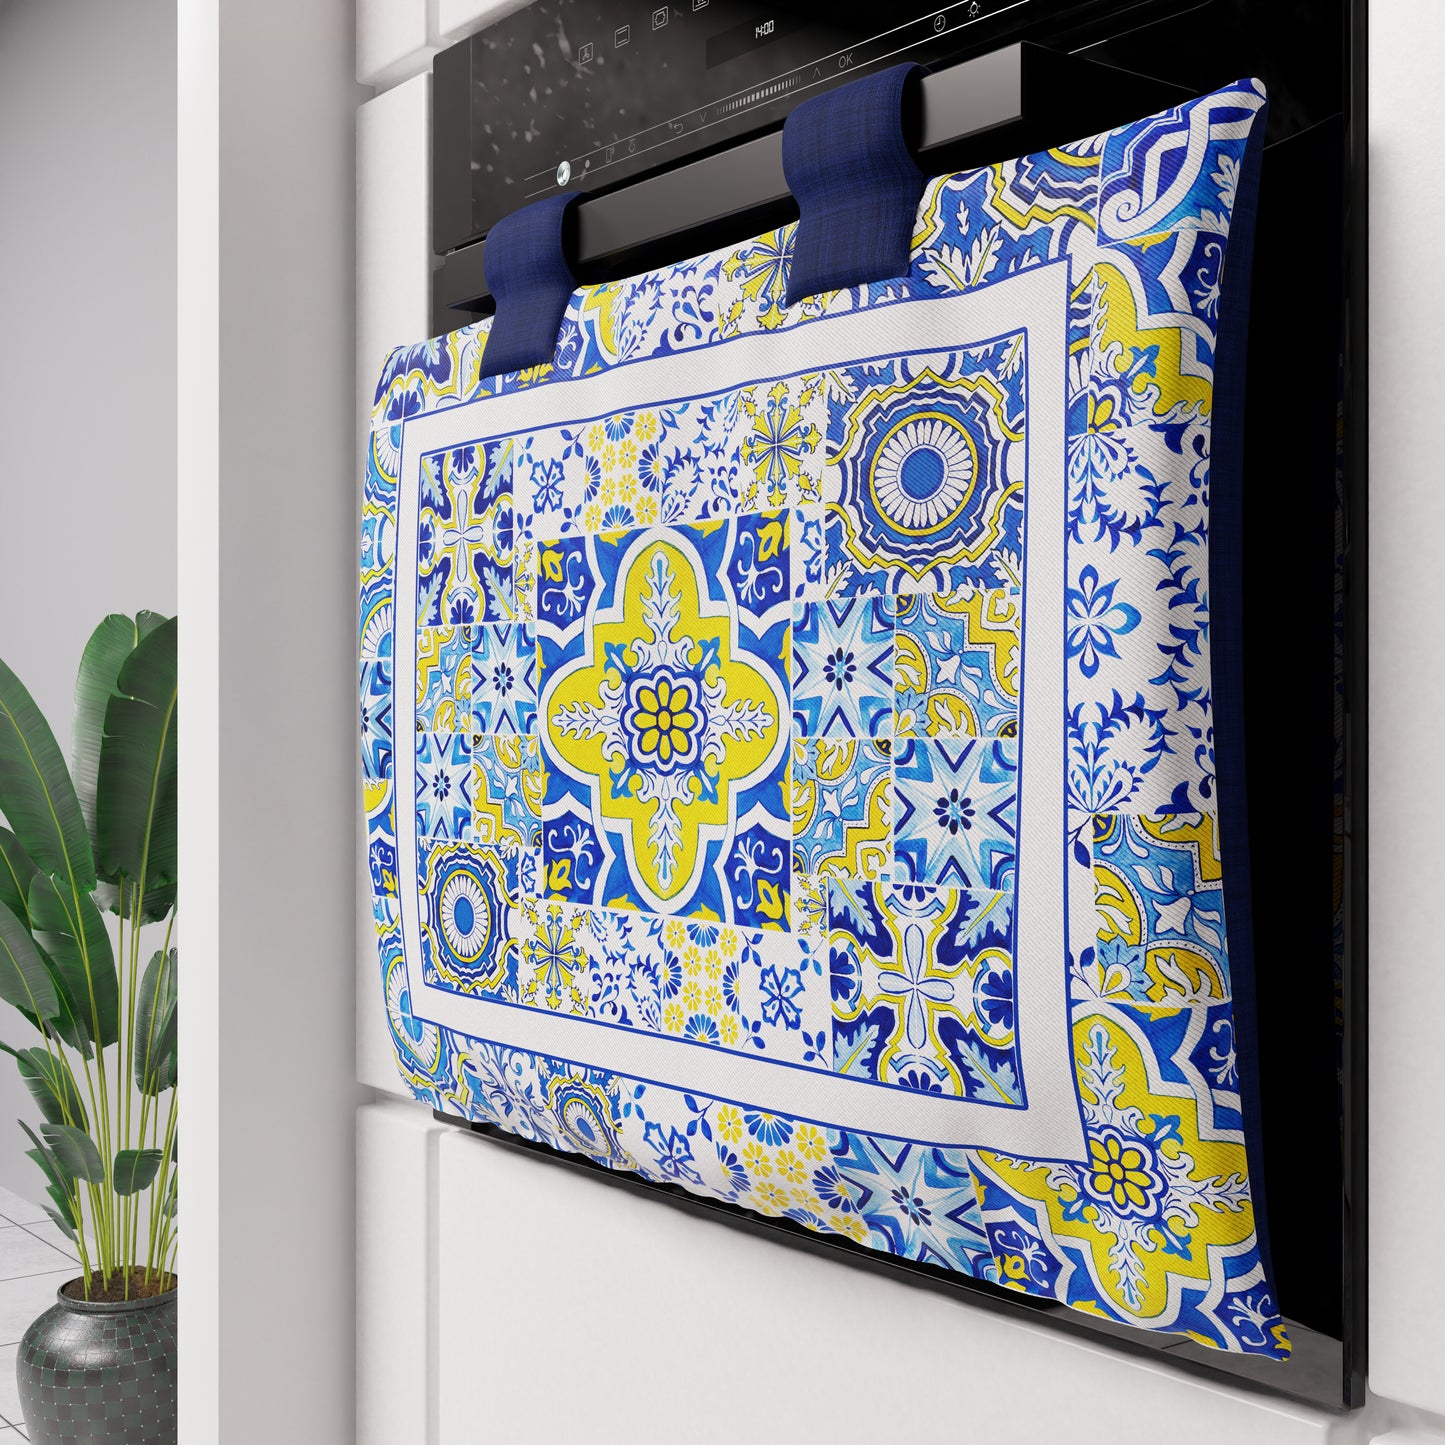 Geometric Oven Cover for Kitchen in Vietri Digital Printing 02 Blue 1pc